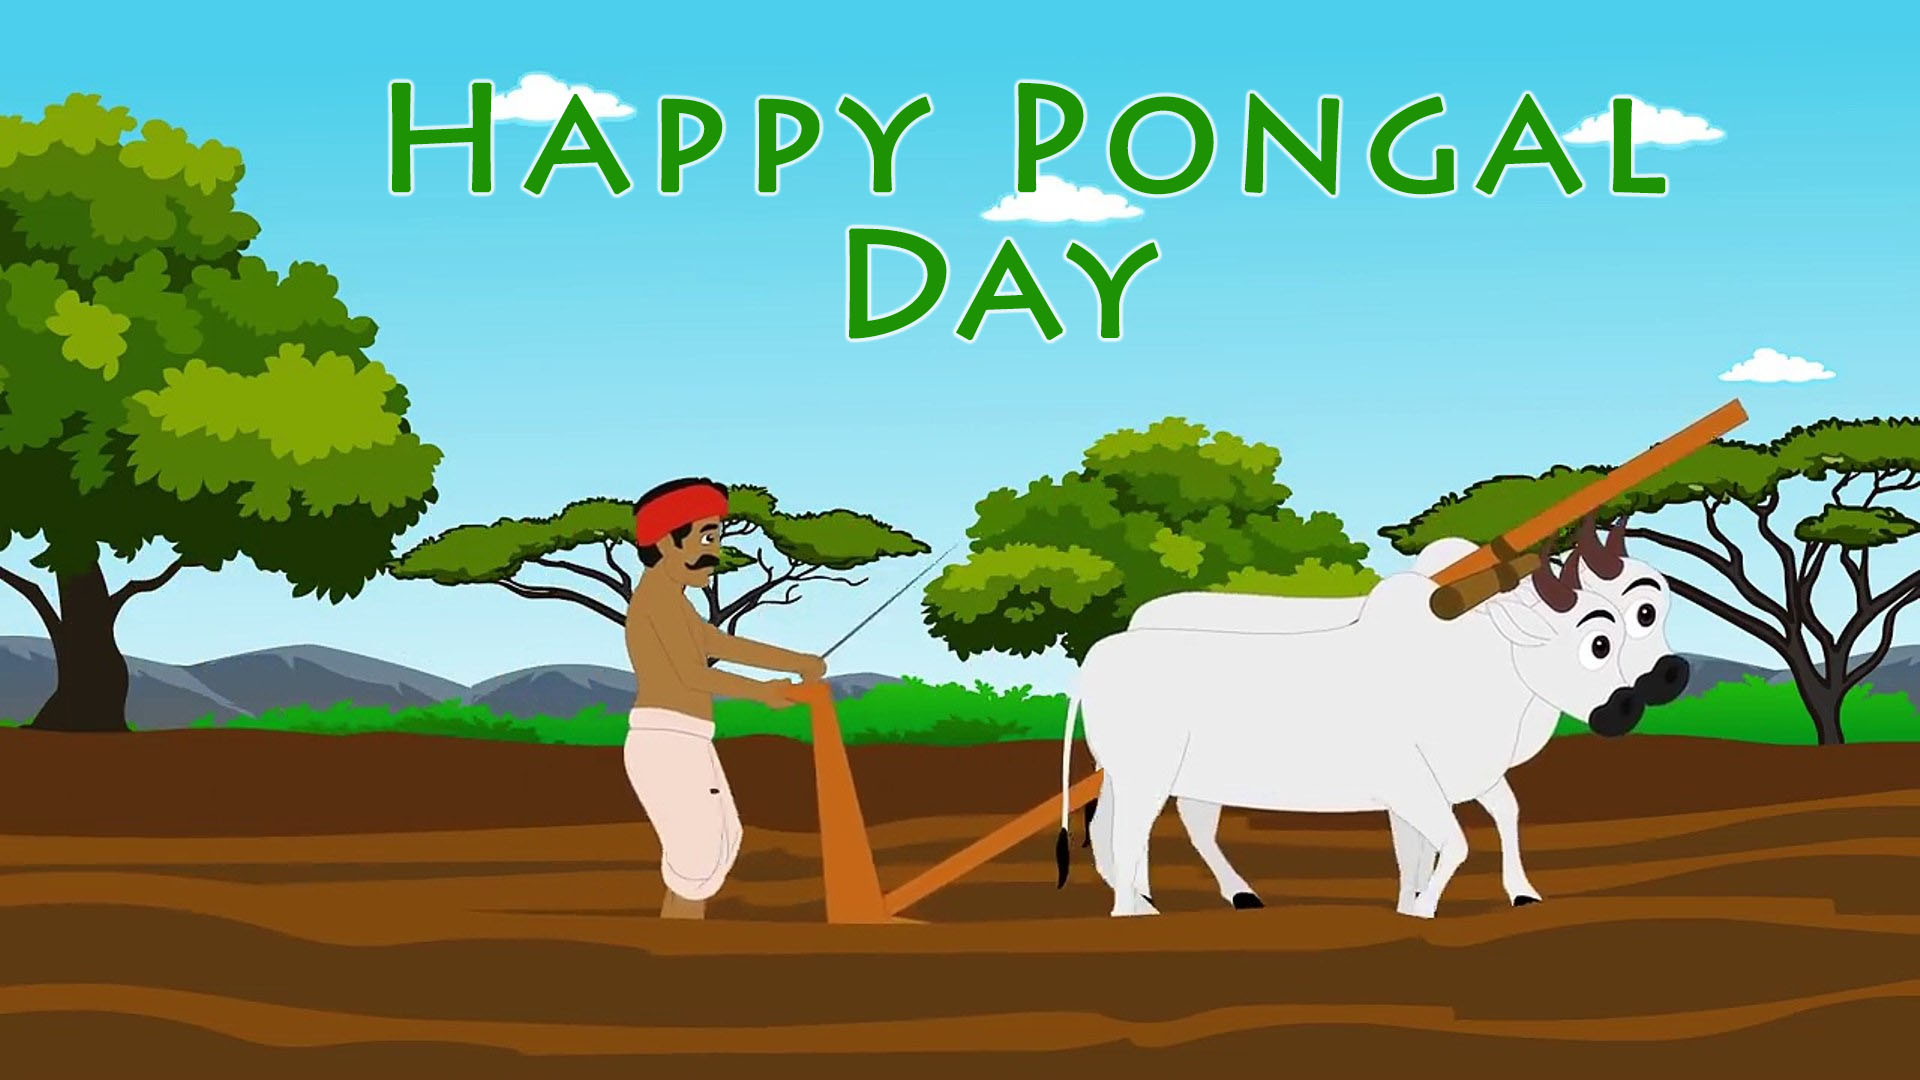 Happy Pongal Festival Wishes Pongal Day Wishes Images Pictures